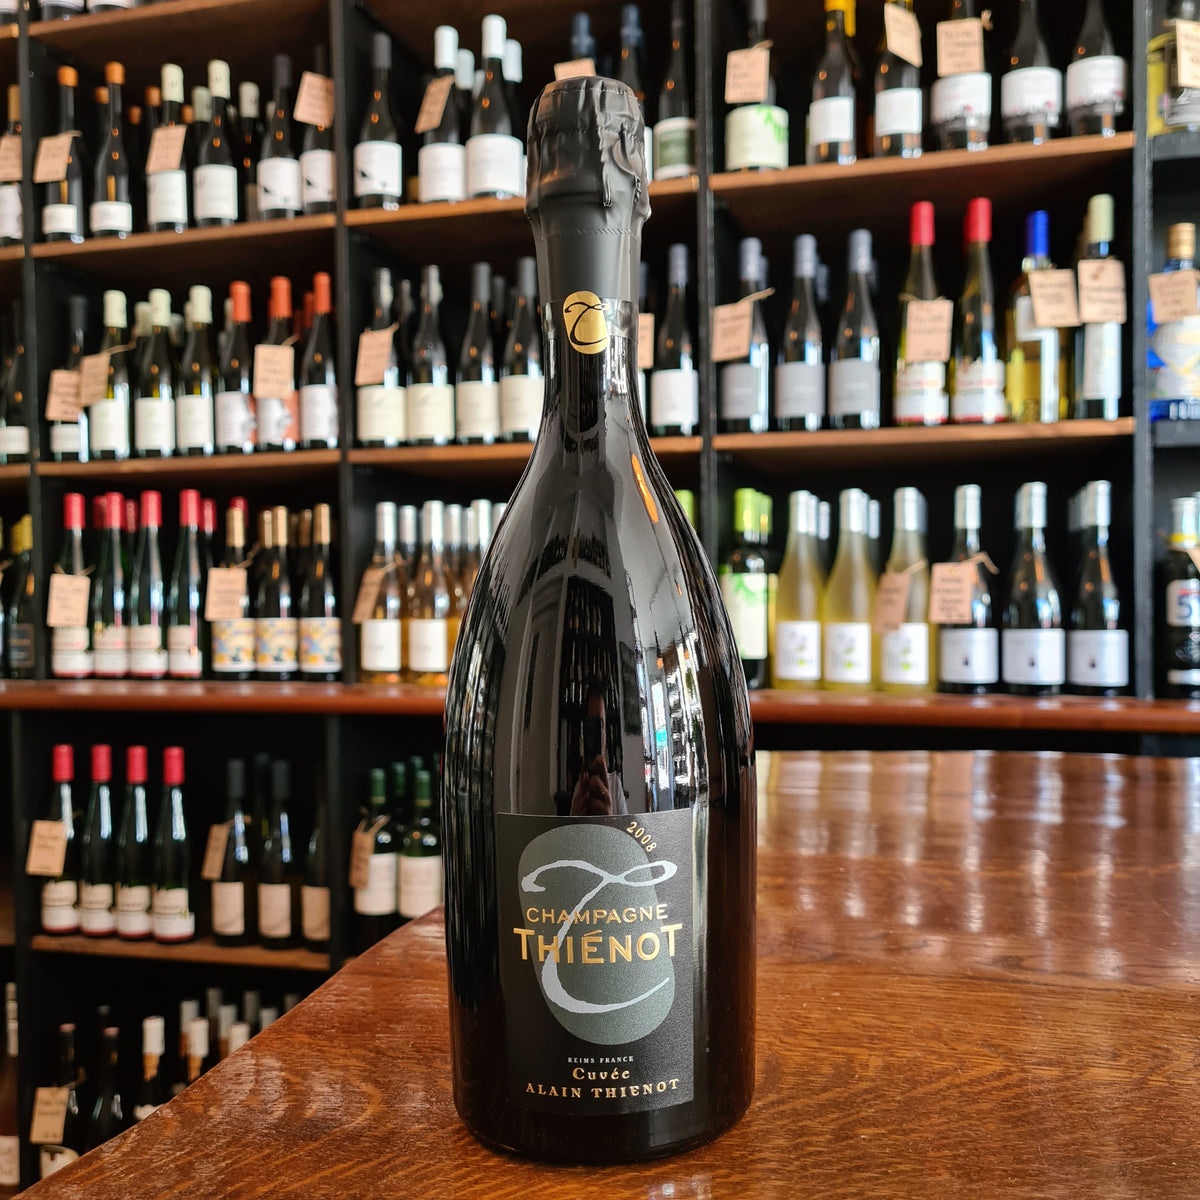 Champagne Thienot Brut Vintage 2008 “Cuvée Alain” – Made In